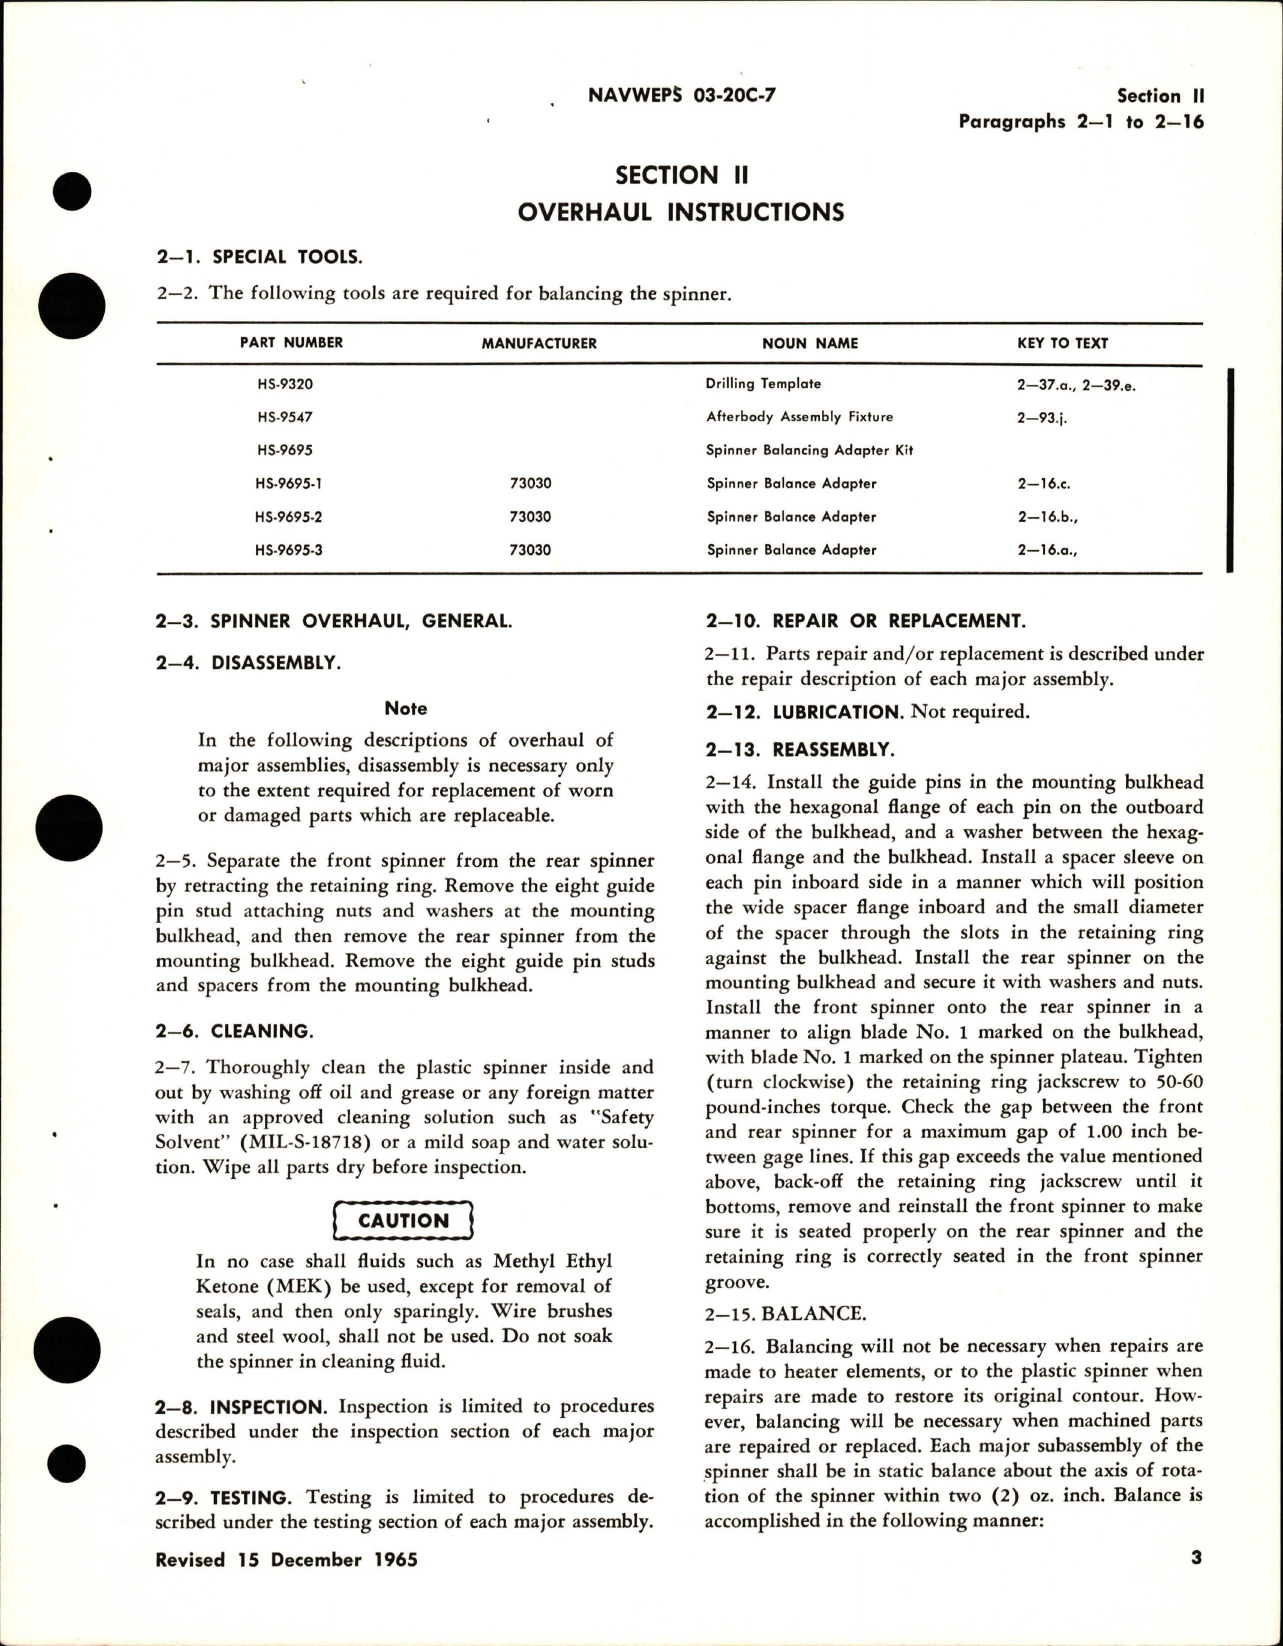 Sample page 5 from AirCorps Library document: Overhaul Instructions for Aircraft Propeller Spinner and Anti-Icing - Assembly No. Spinner 549427 and Afterbody 557635